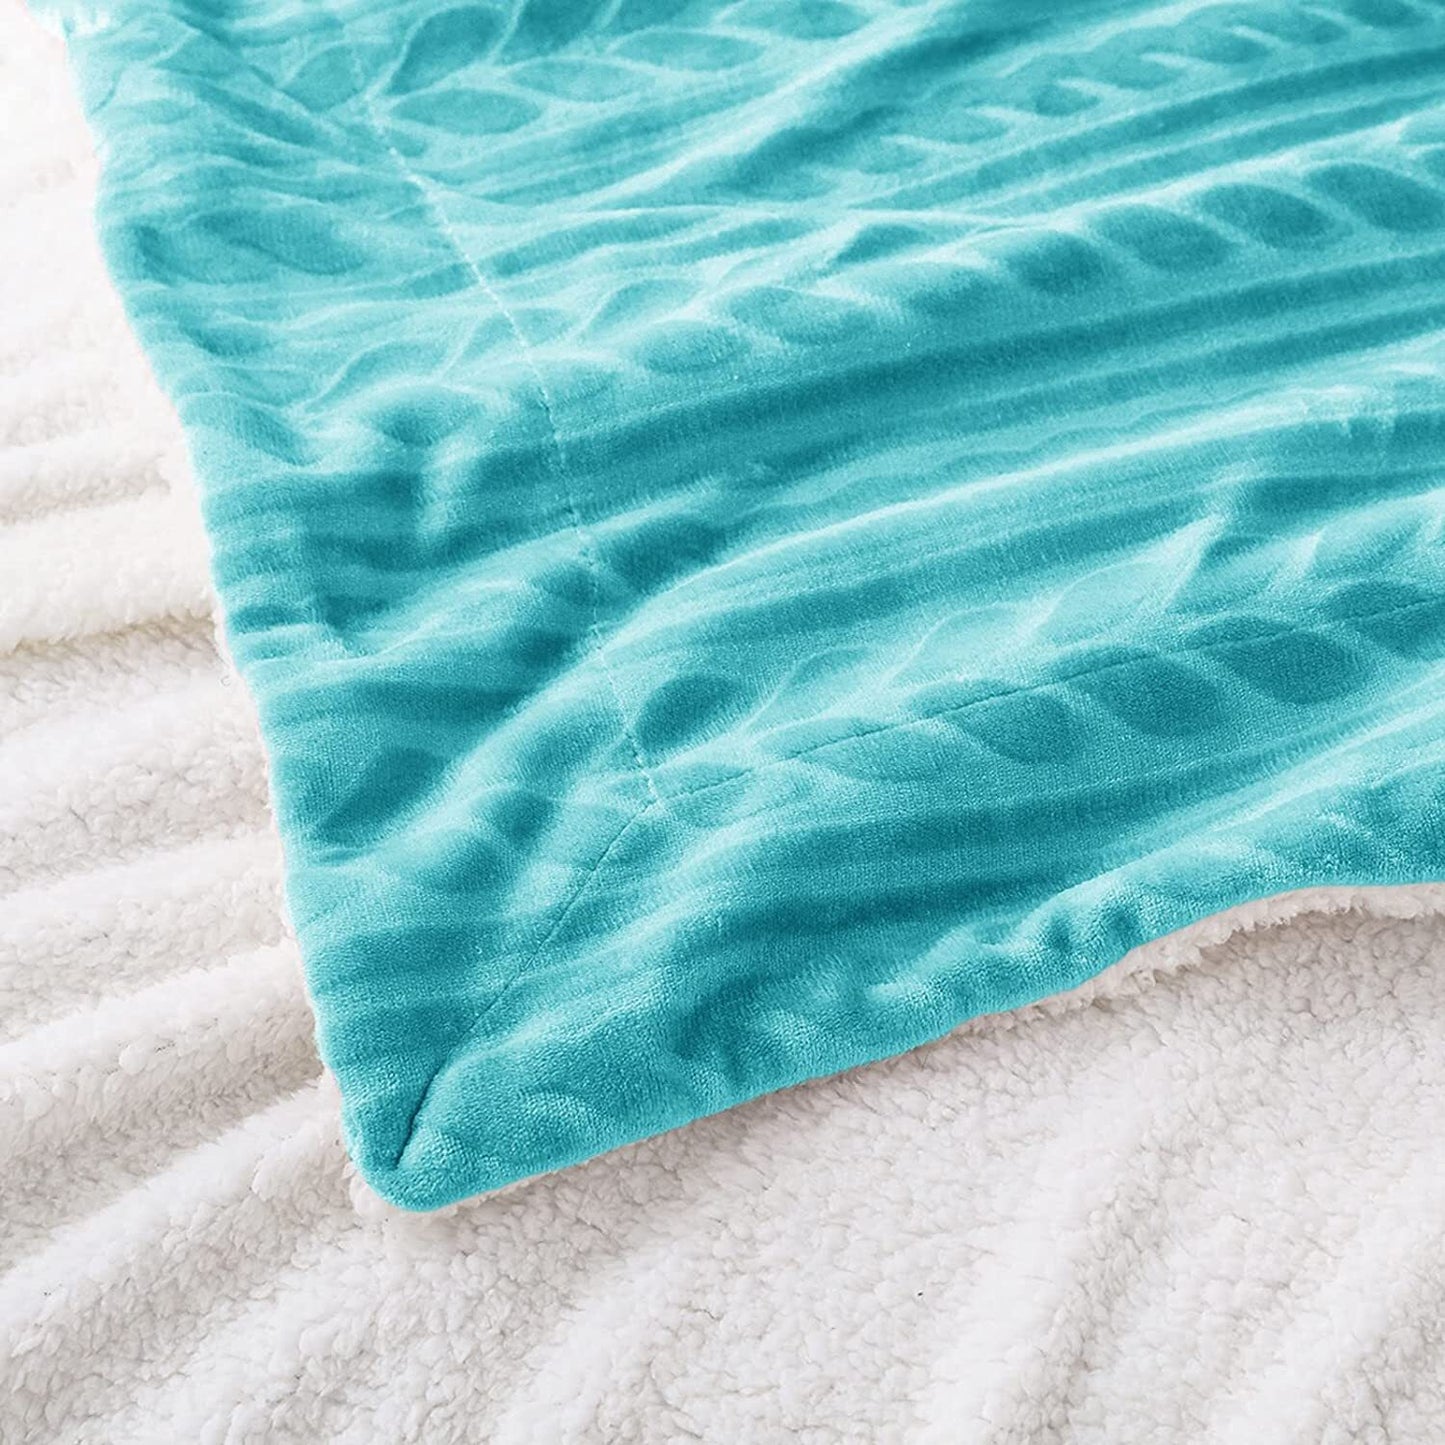 Exclusivo Mezcla Twin Size Sherpa Fleece Bed Blanket, Ultra Soft and Warm Reversible Velvet Blankets for Bed Couch Sofa 90x66 inches, Aqua Blue